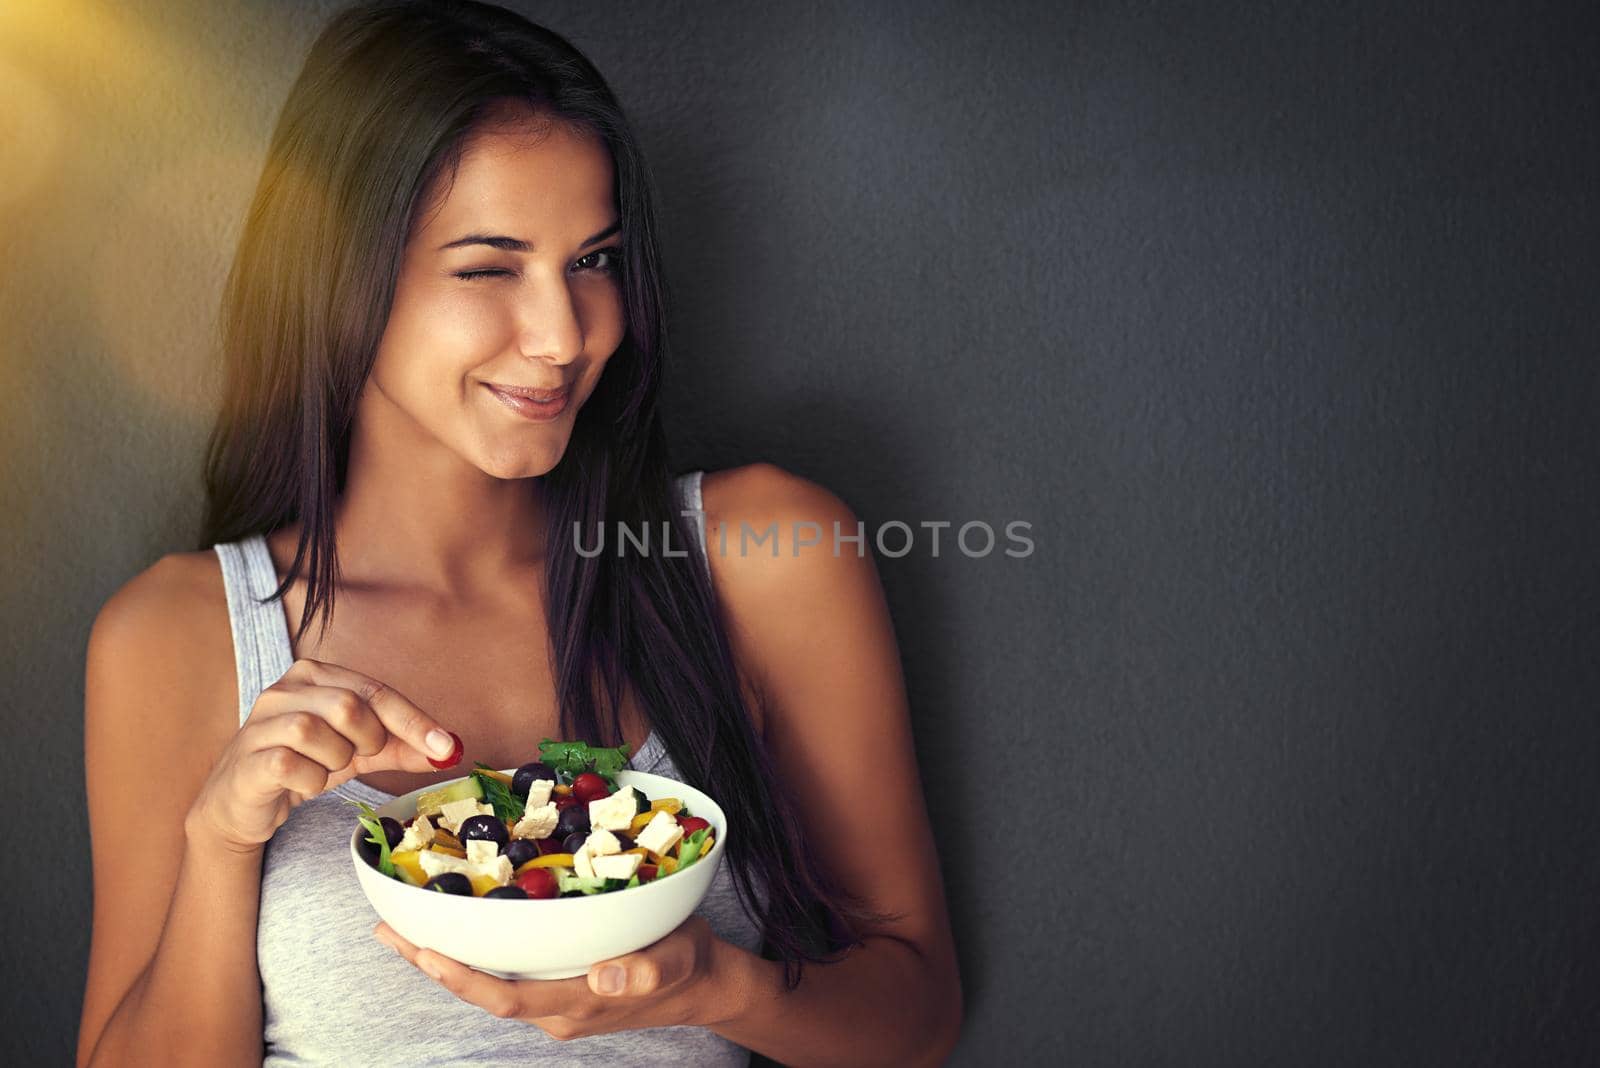 You're gonna love this. Portrait of a healthy young woman eating a salad against a gray background. by YuriArcurs